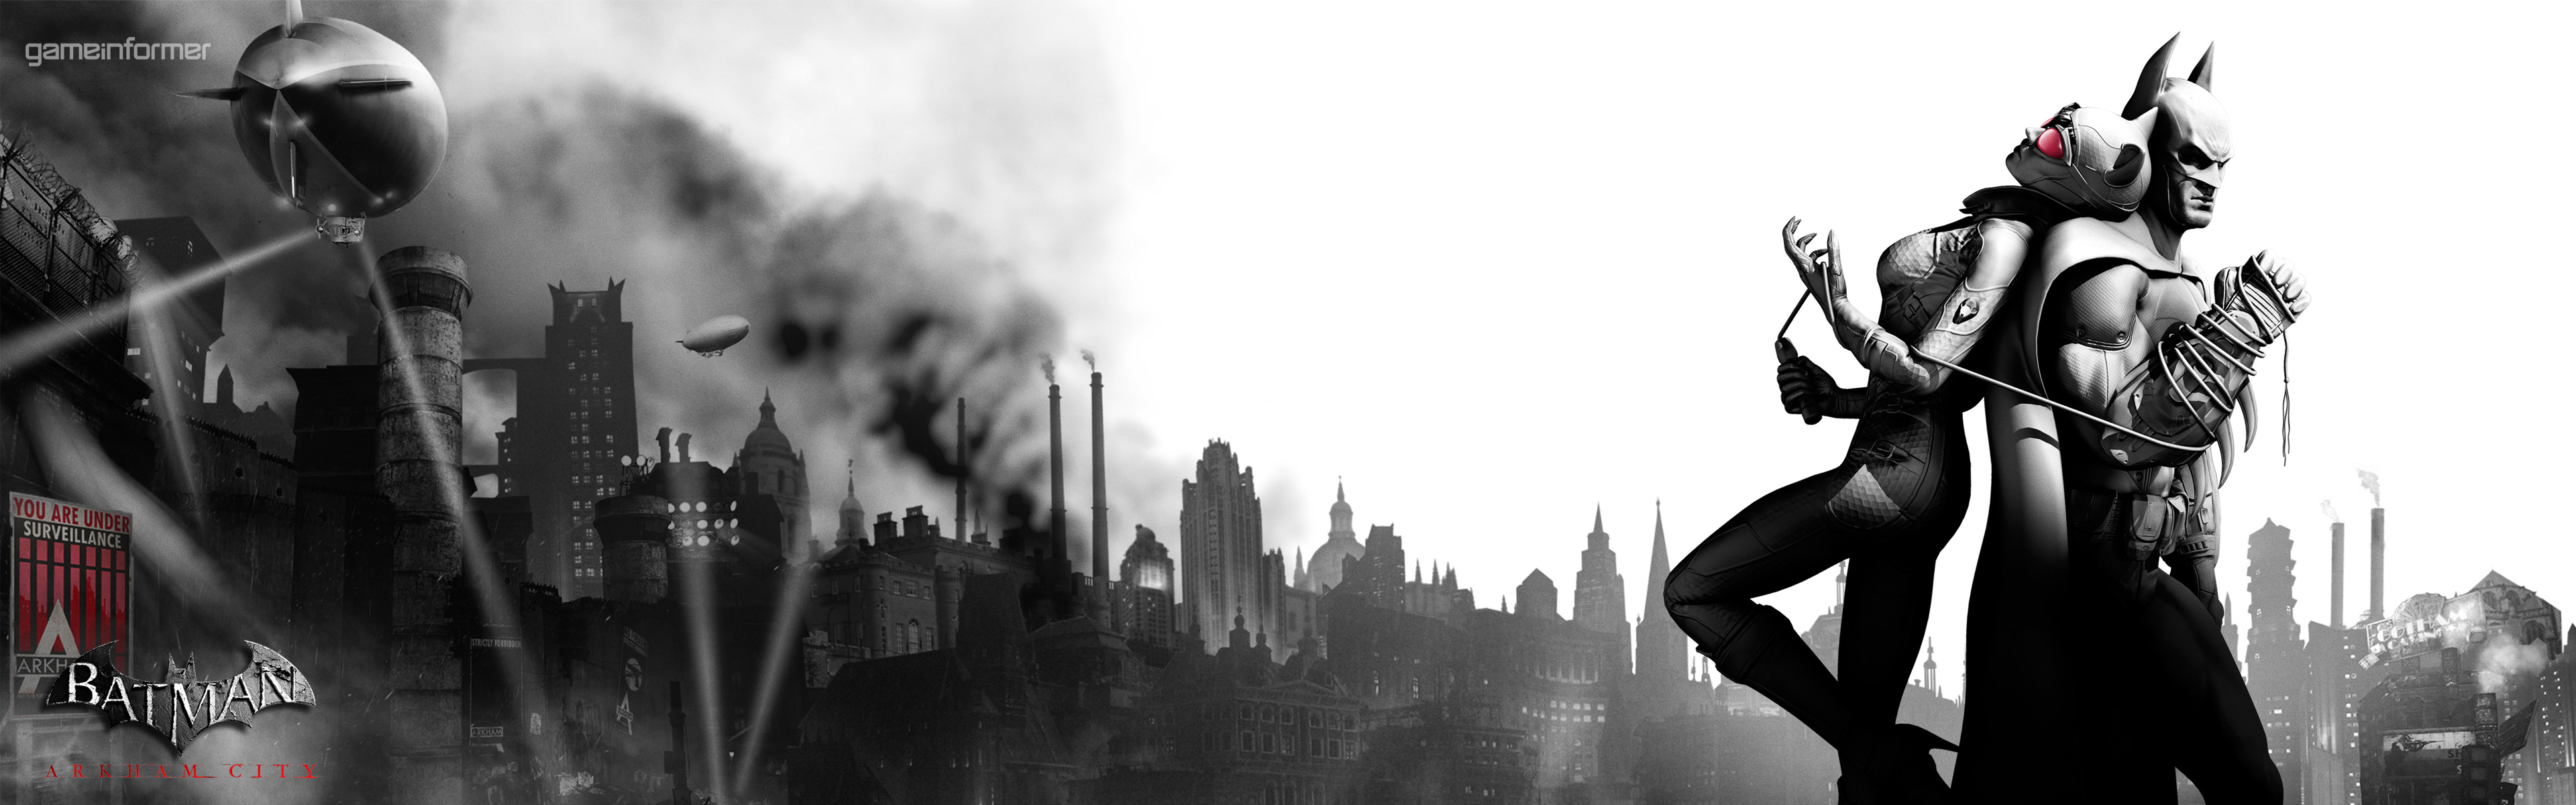 Free download Batman Arkham City Wallpapers For Everyone News  wwwGameInformer [3840x1200] for your Desktop, Mobile & Tablet | Explore 42+  Panoramic Wallpaper Dual Screen 3840 x 1200 | Panoramic Wallpaper Dual  Screen